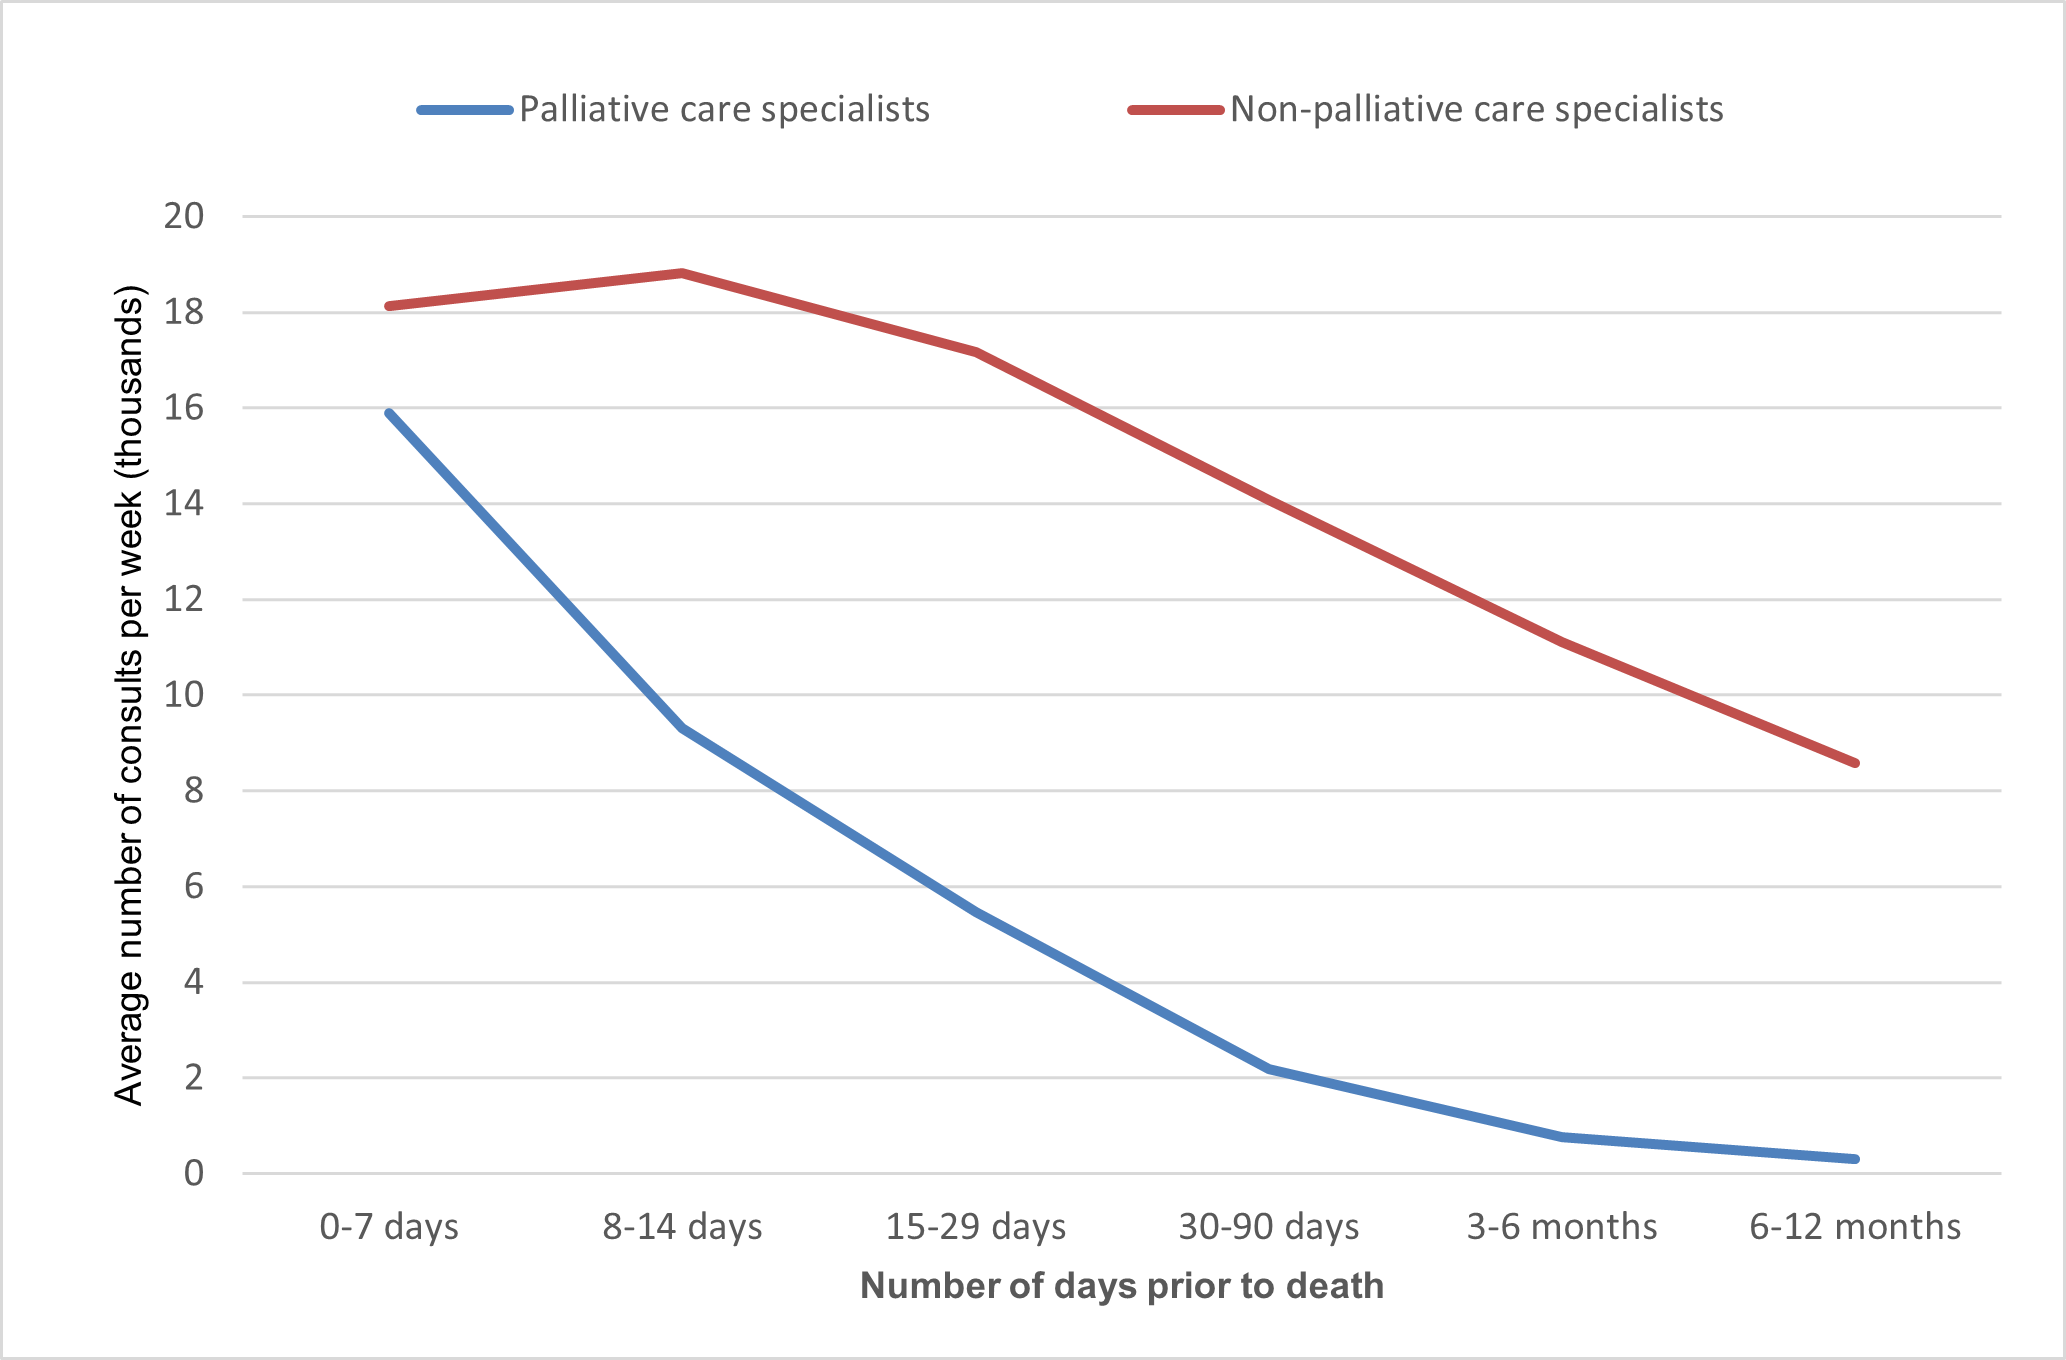 This compares palliative care consultations versus non-palliative care specialist consultations for the average number of MBS specialist consultation services (in thousands) per week, in the last year of life, by time intervals before death, for the SPC population.